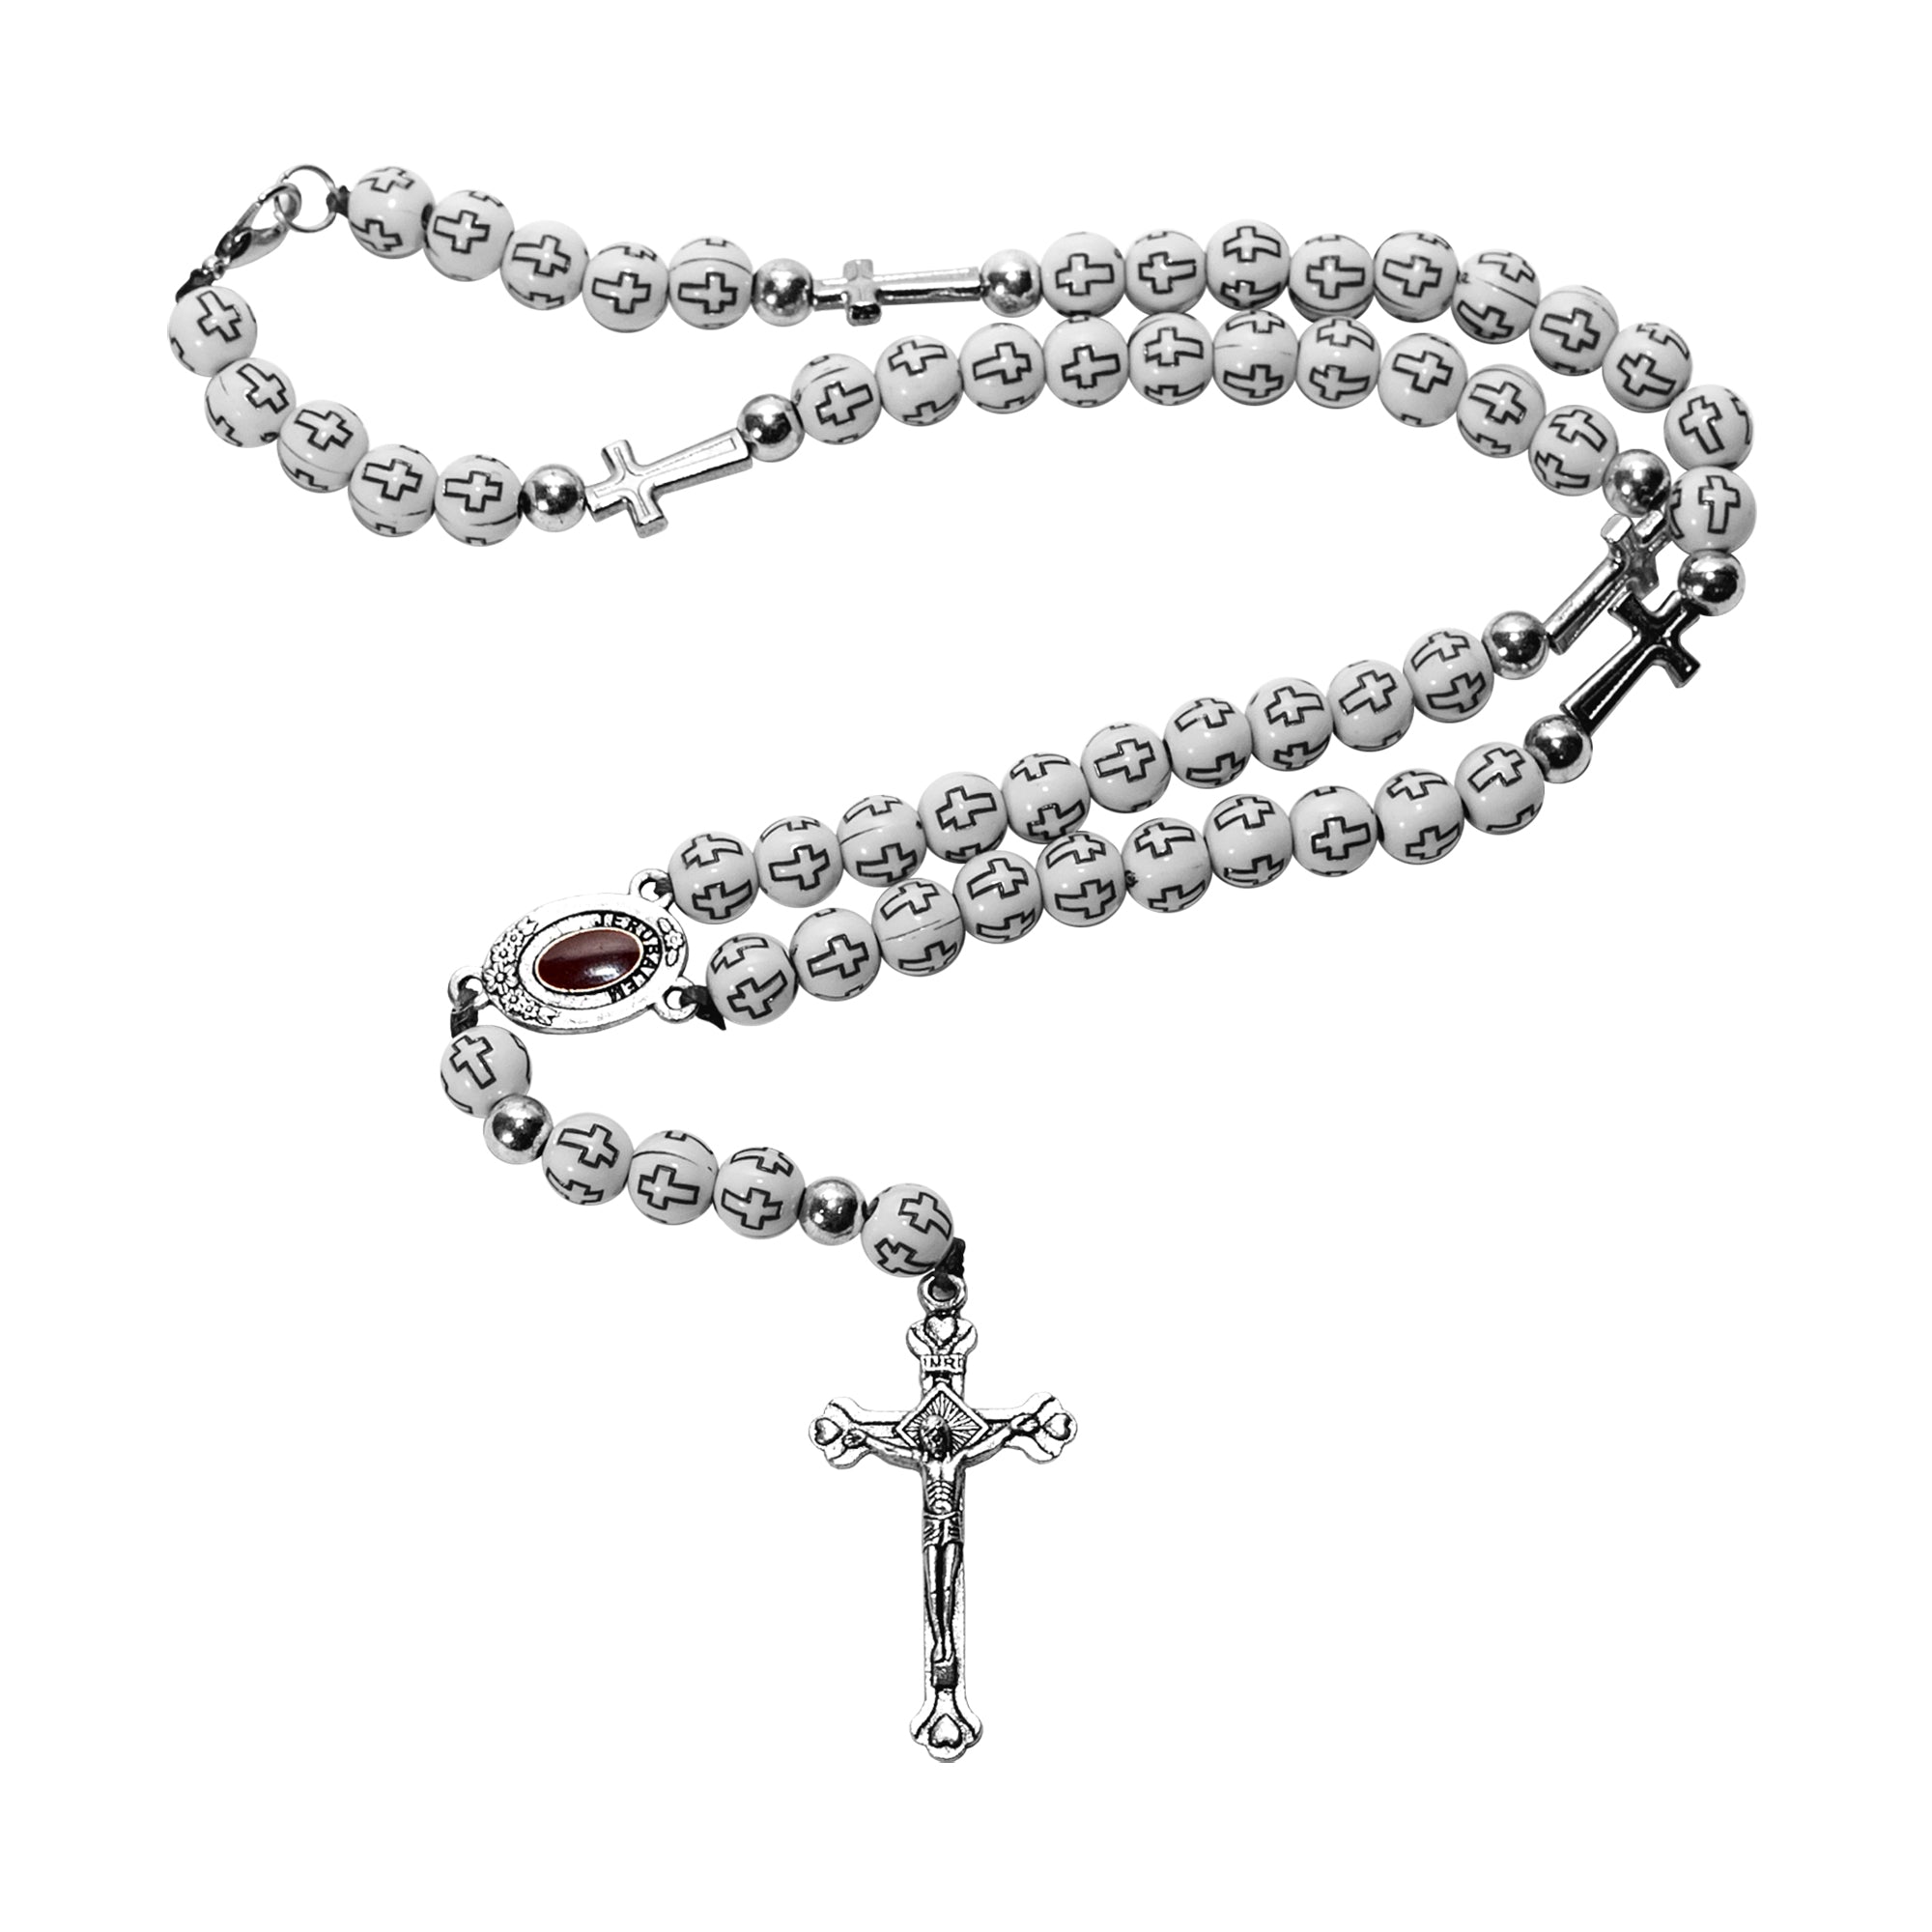 Silver Stainless Steel Rosary Necklace Jesus Cross Miraculous Center.  Handmade | eBay